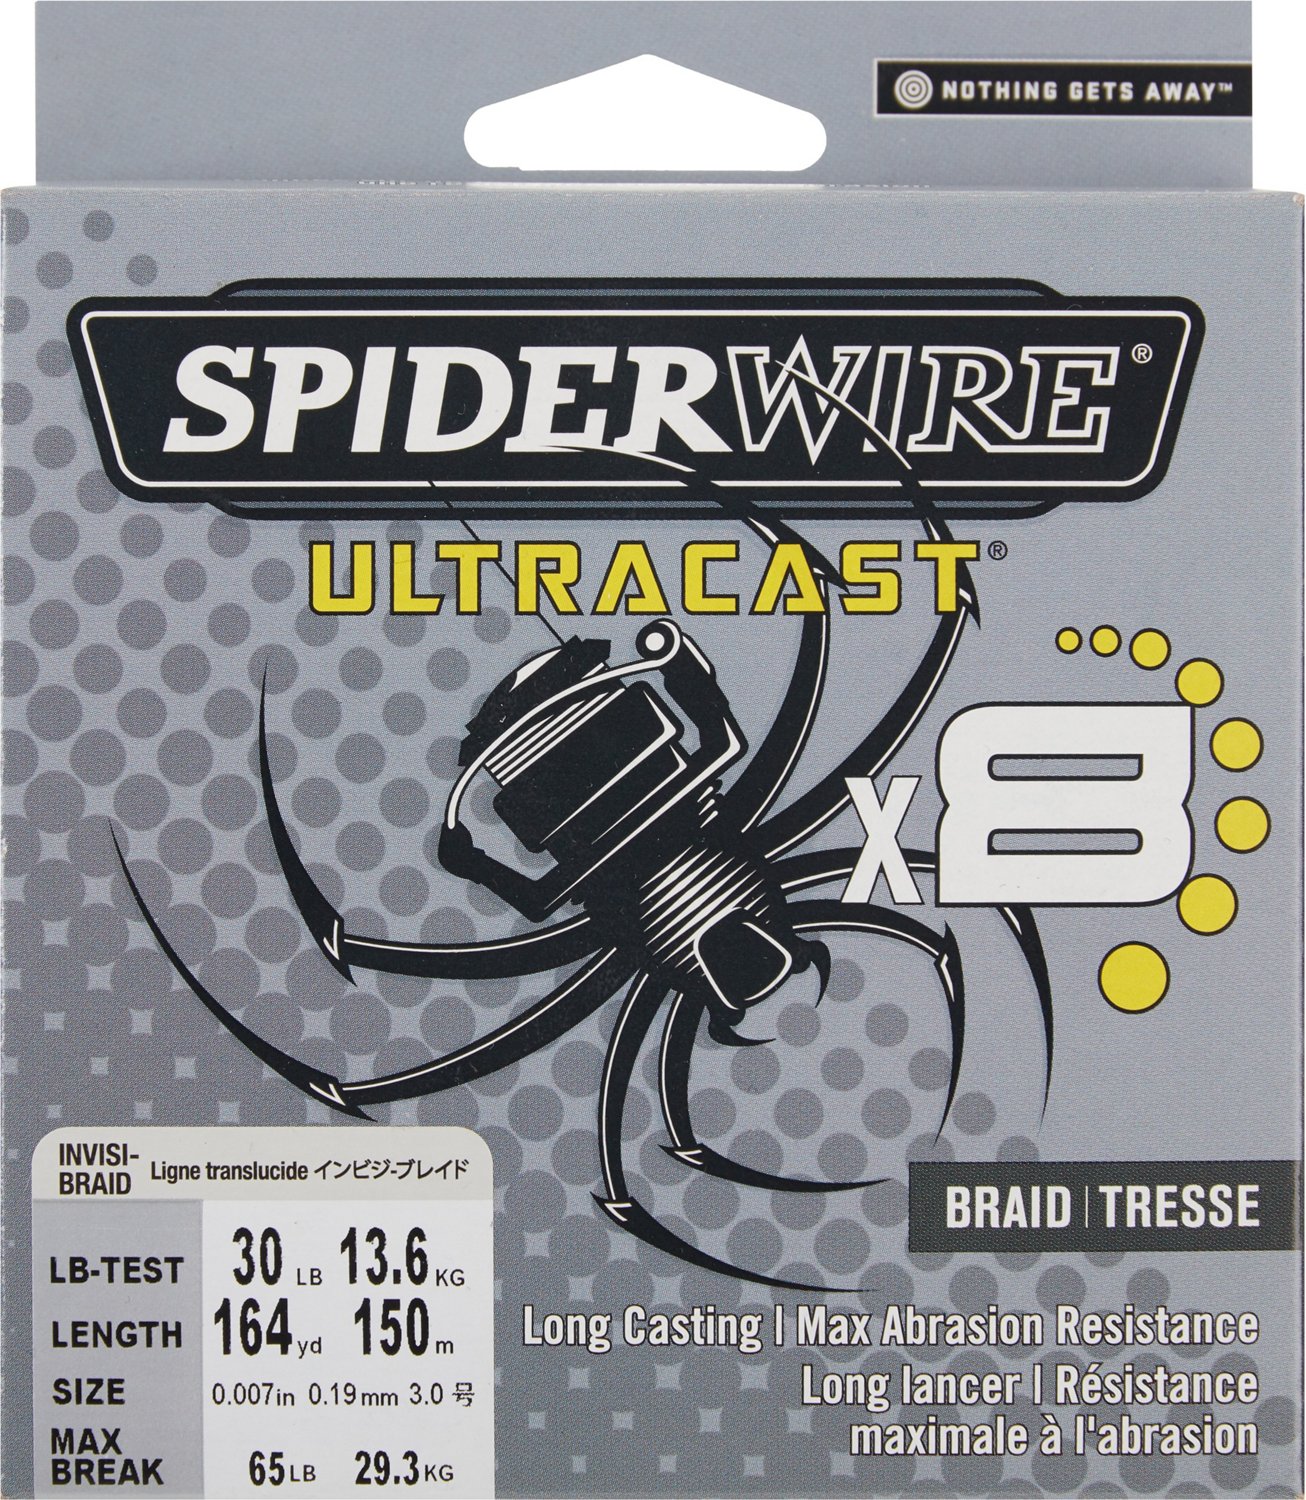 Spiderwire Ultracast 164 yds Braided Fishing Line